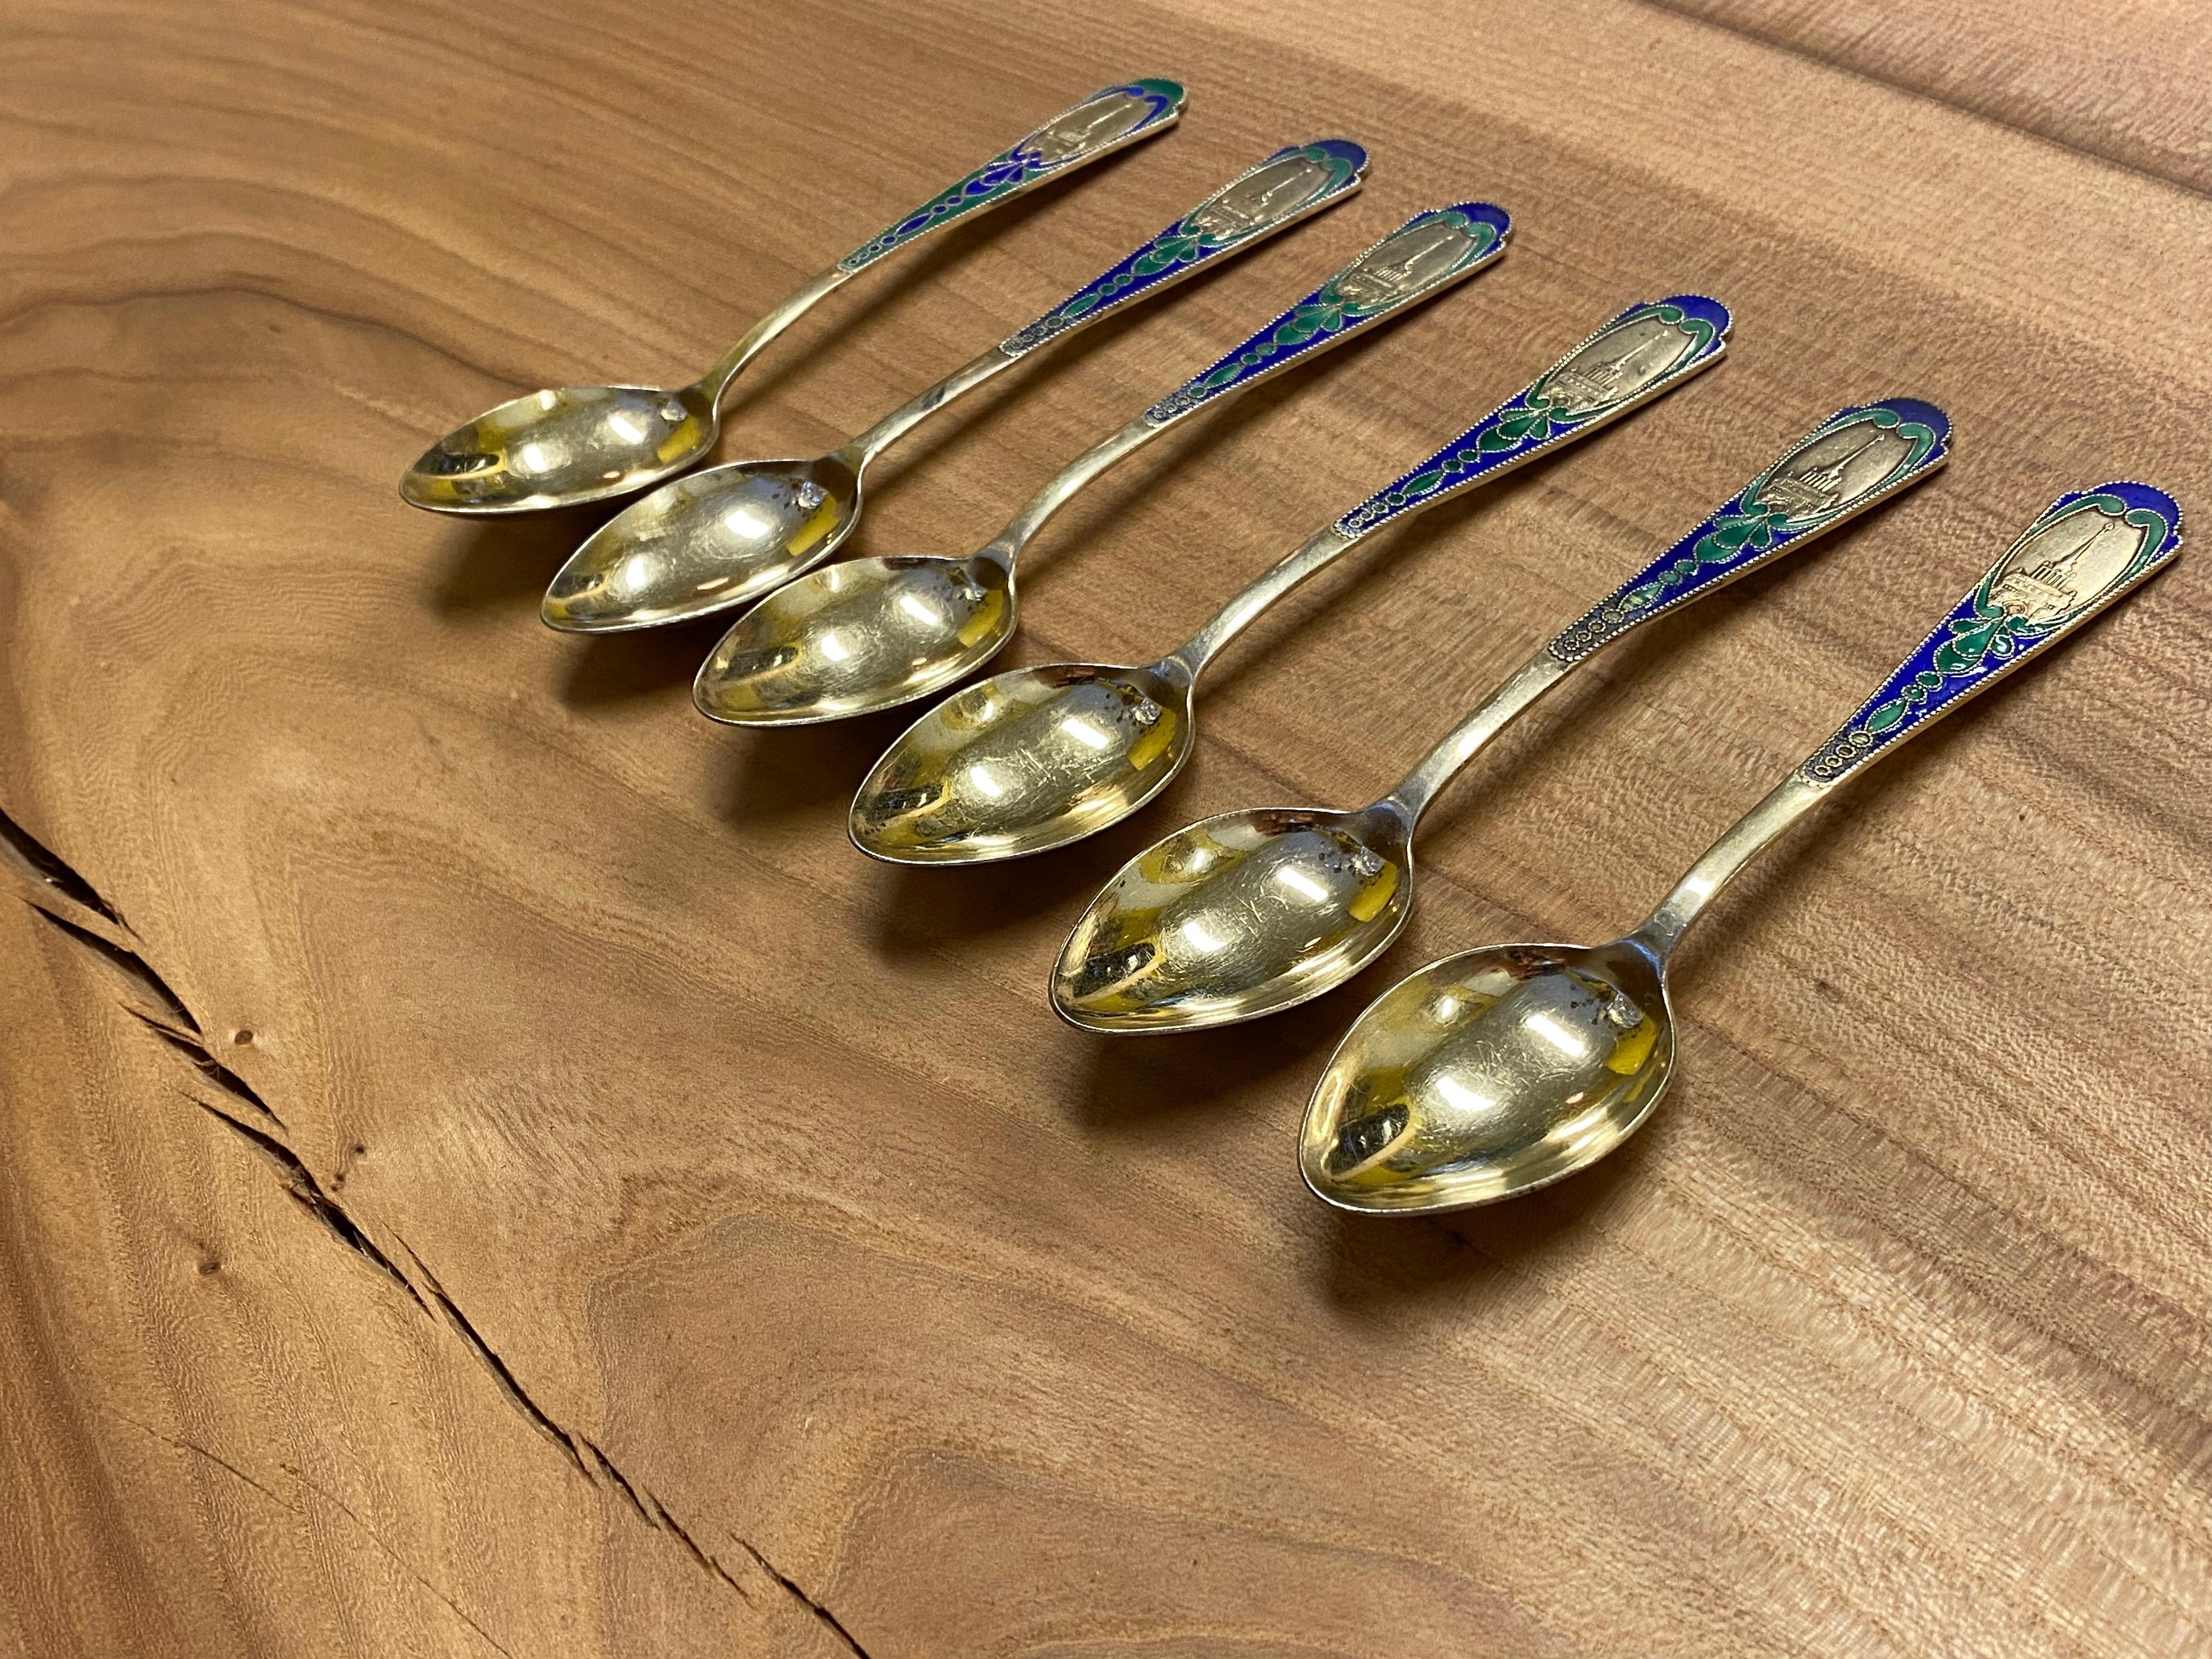 Set of 6 Russian Enamel Spoons
Fine and Rare Soviet Silver Spoons.
Enamelled. Enamel Church, is Moscow the Kremlin ?
These were probably made in the 1950s.
Stamp Head 875 and nф6
Very solid body and a total weight of about 152g